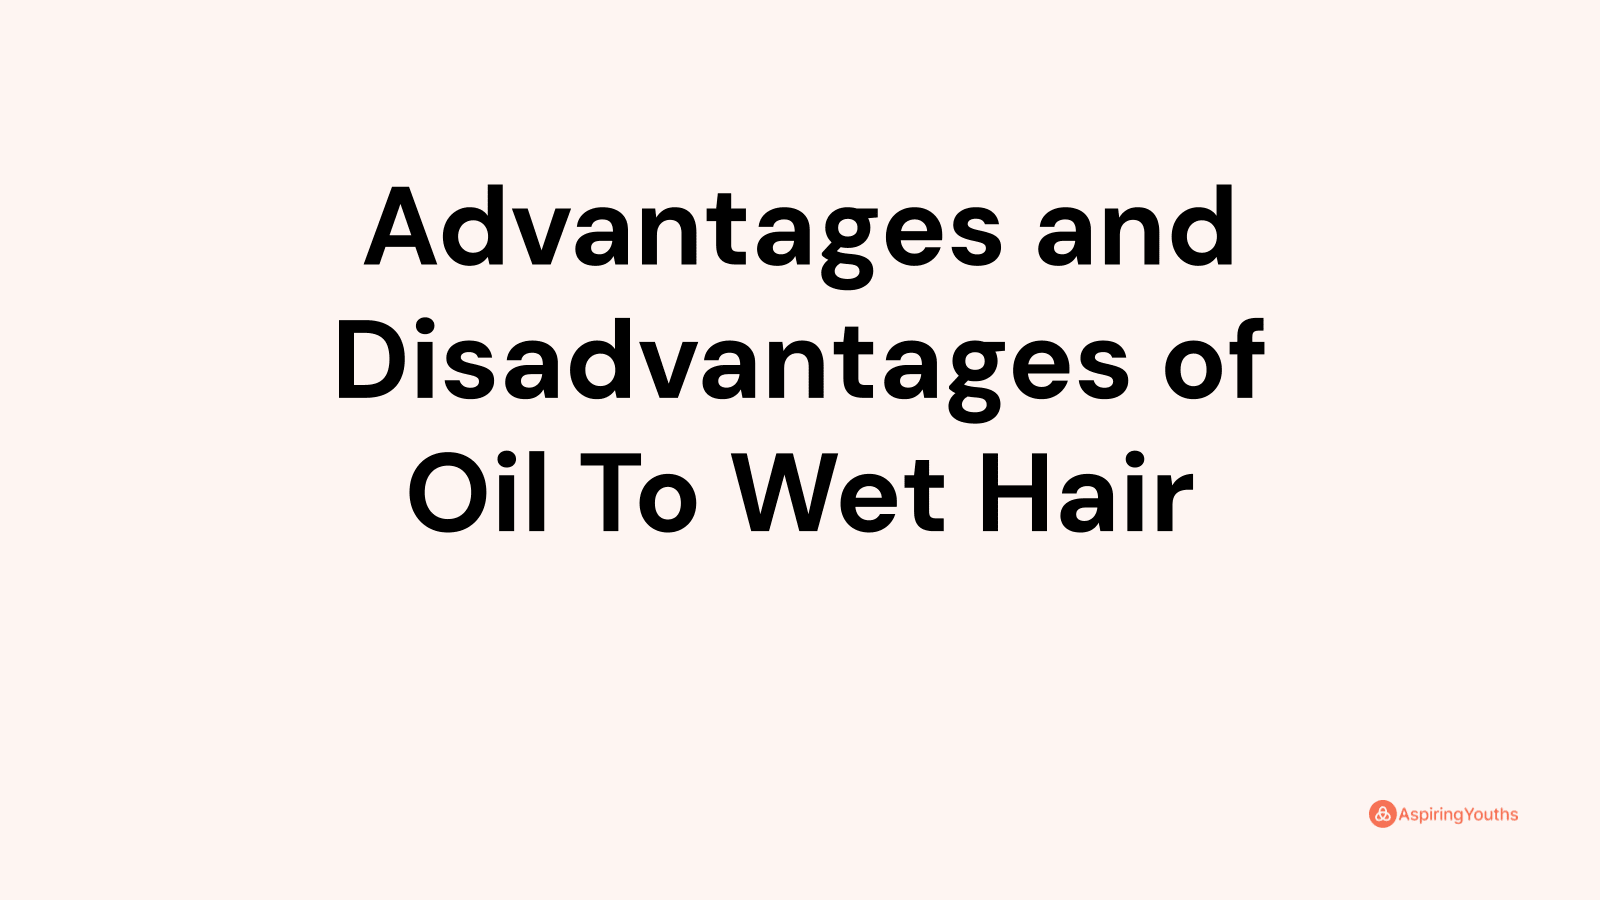 Advantages and disadvantages of Oil To Wet Hair